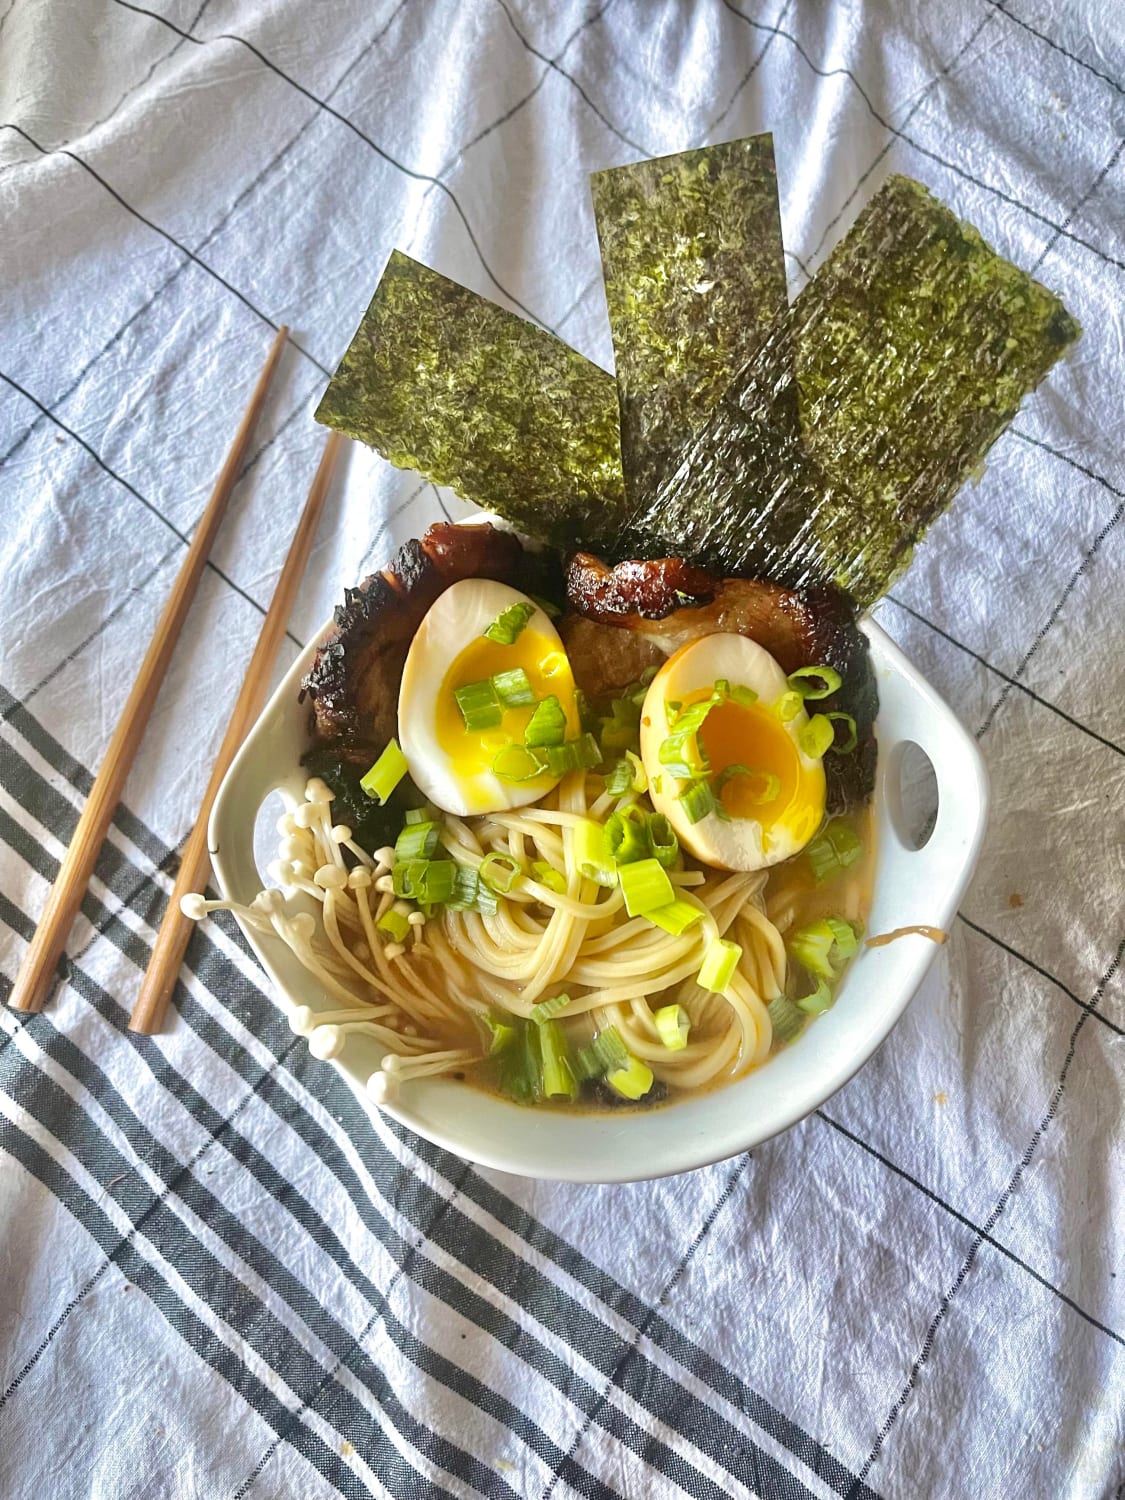 Homemade Ramen I made! Noodles in a broth made with homemade vegetable stock and marinade from the also pictured chashu pork. Topped with soy marinaded soft boiled eggs, nori, enoki mushrooms, and scallions.